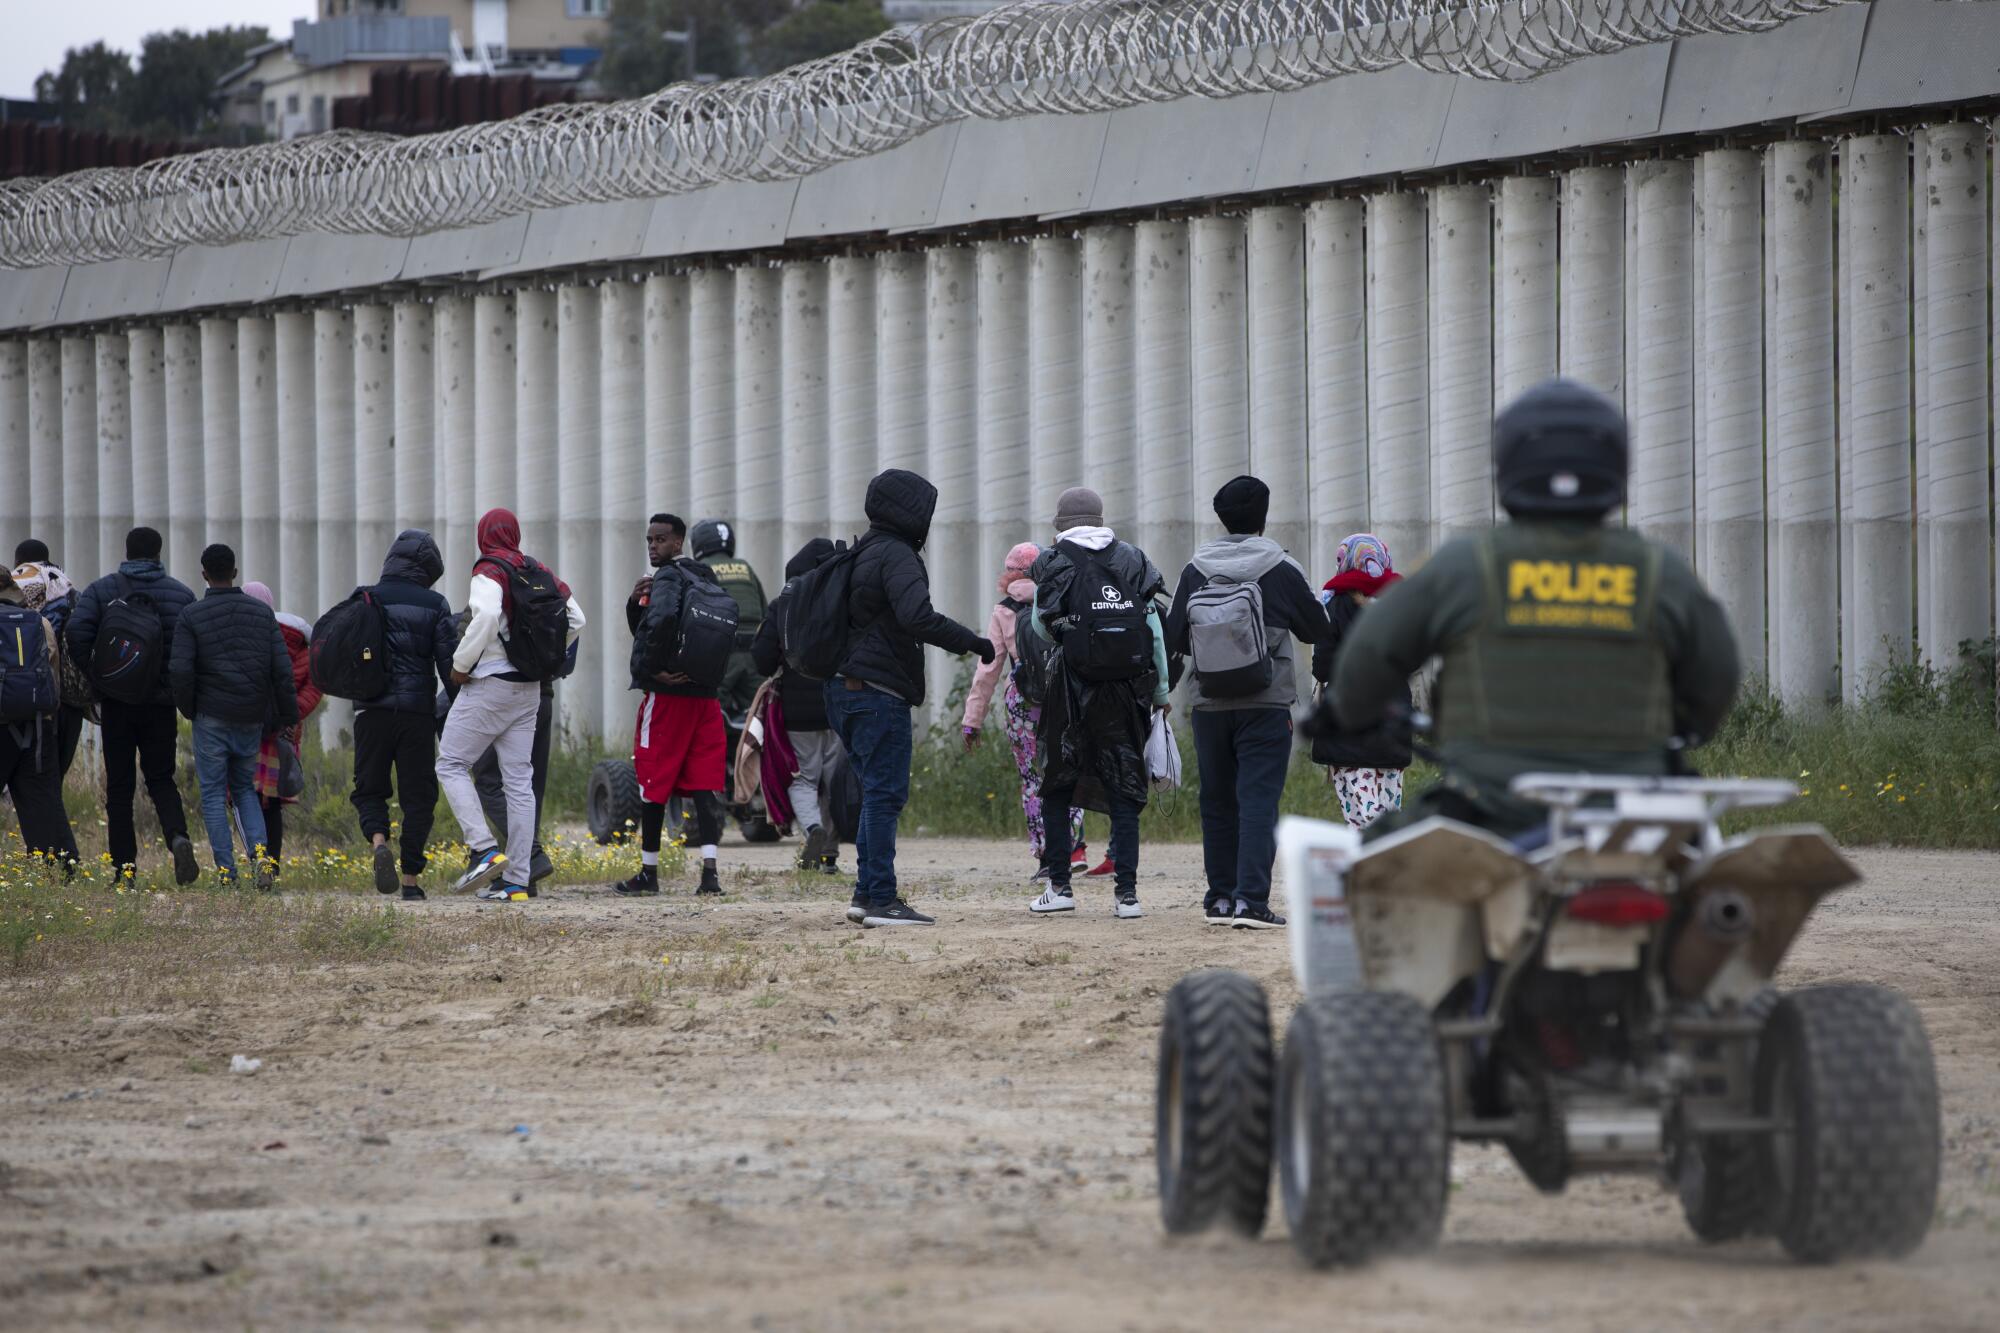 A Border Patrol agent on an ATV chases a group of migrants